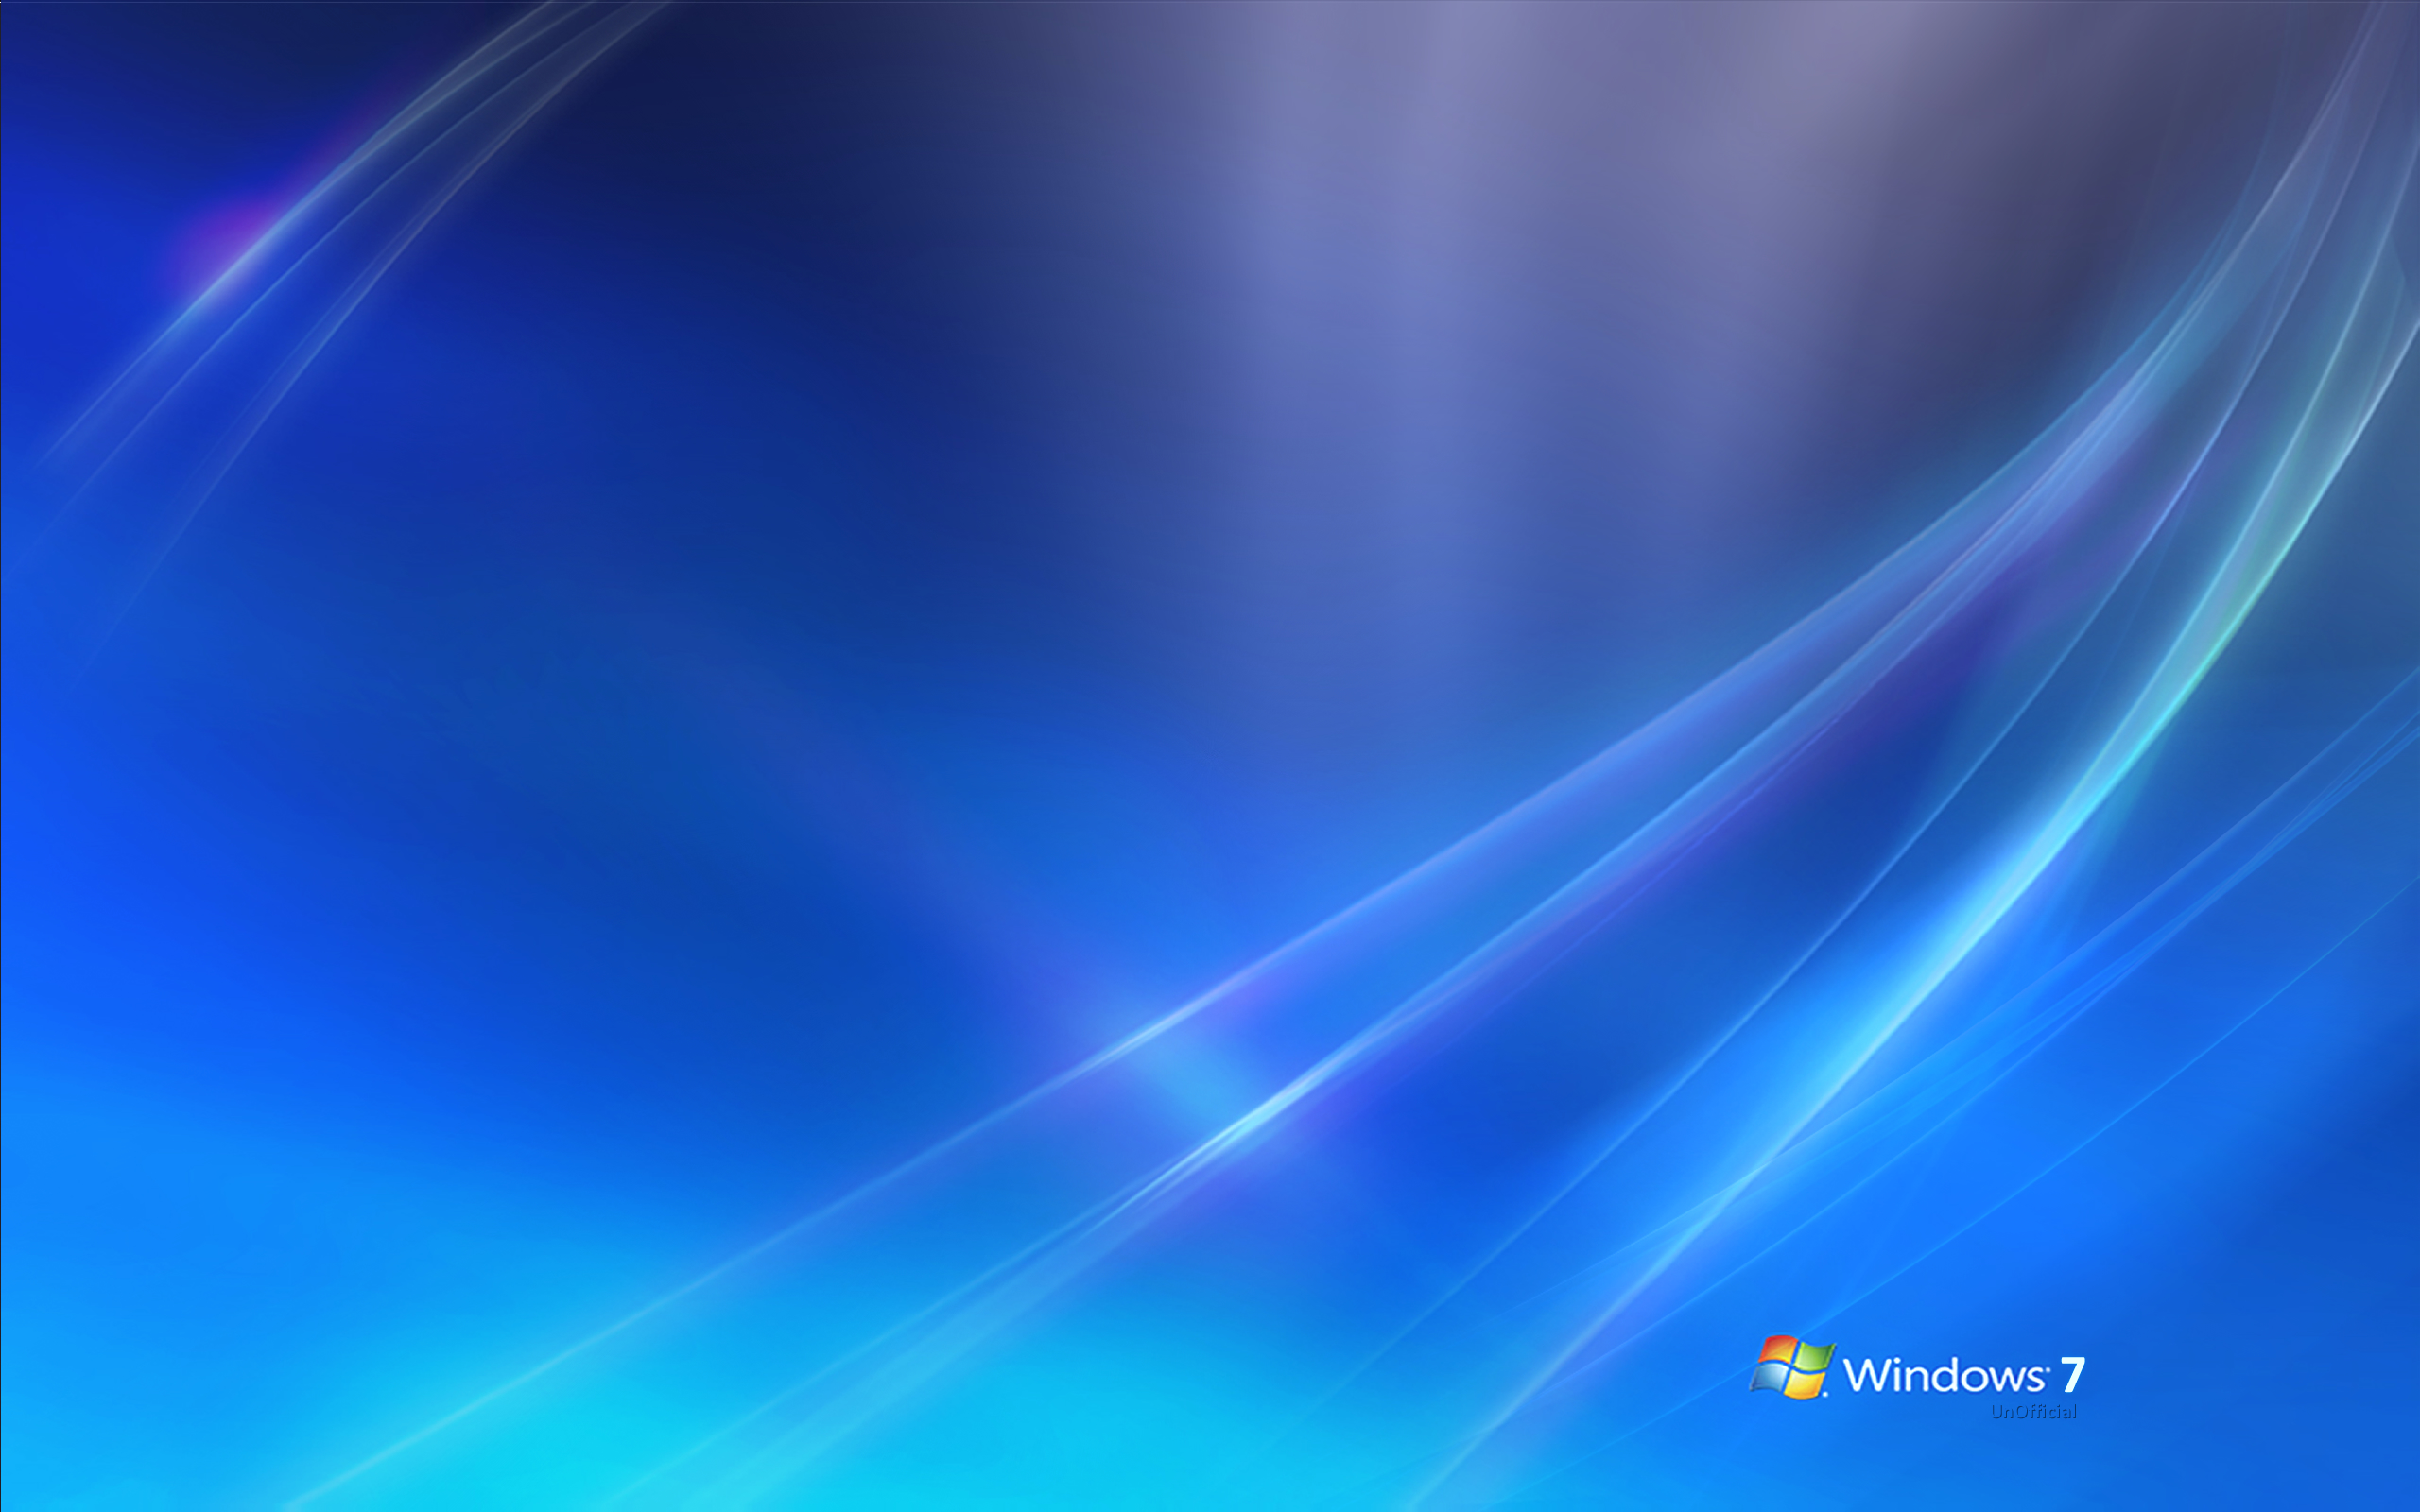 Free download windows 7 wallpapers windows 7 wallpapers or you can